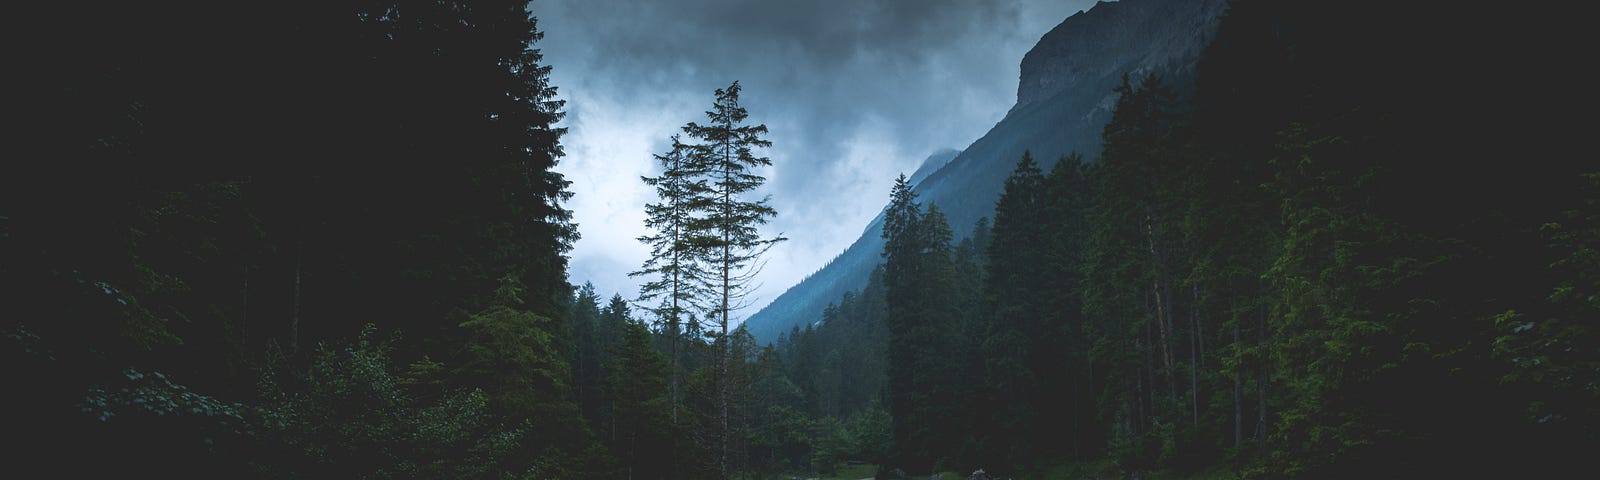 A beautiful photograph of a valley in between two mountains with a streak snaking through it. The sky is dark with storm clouds.